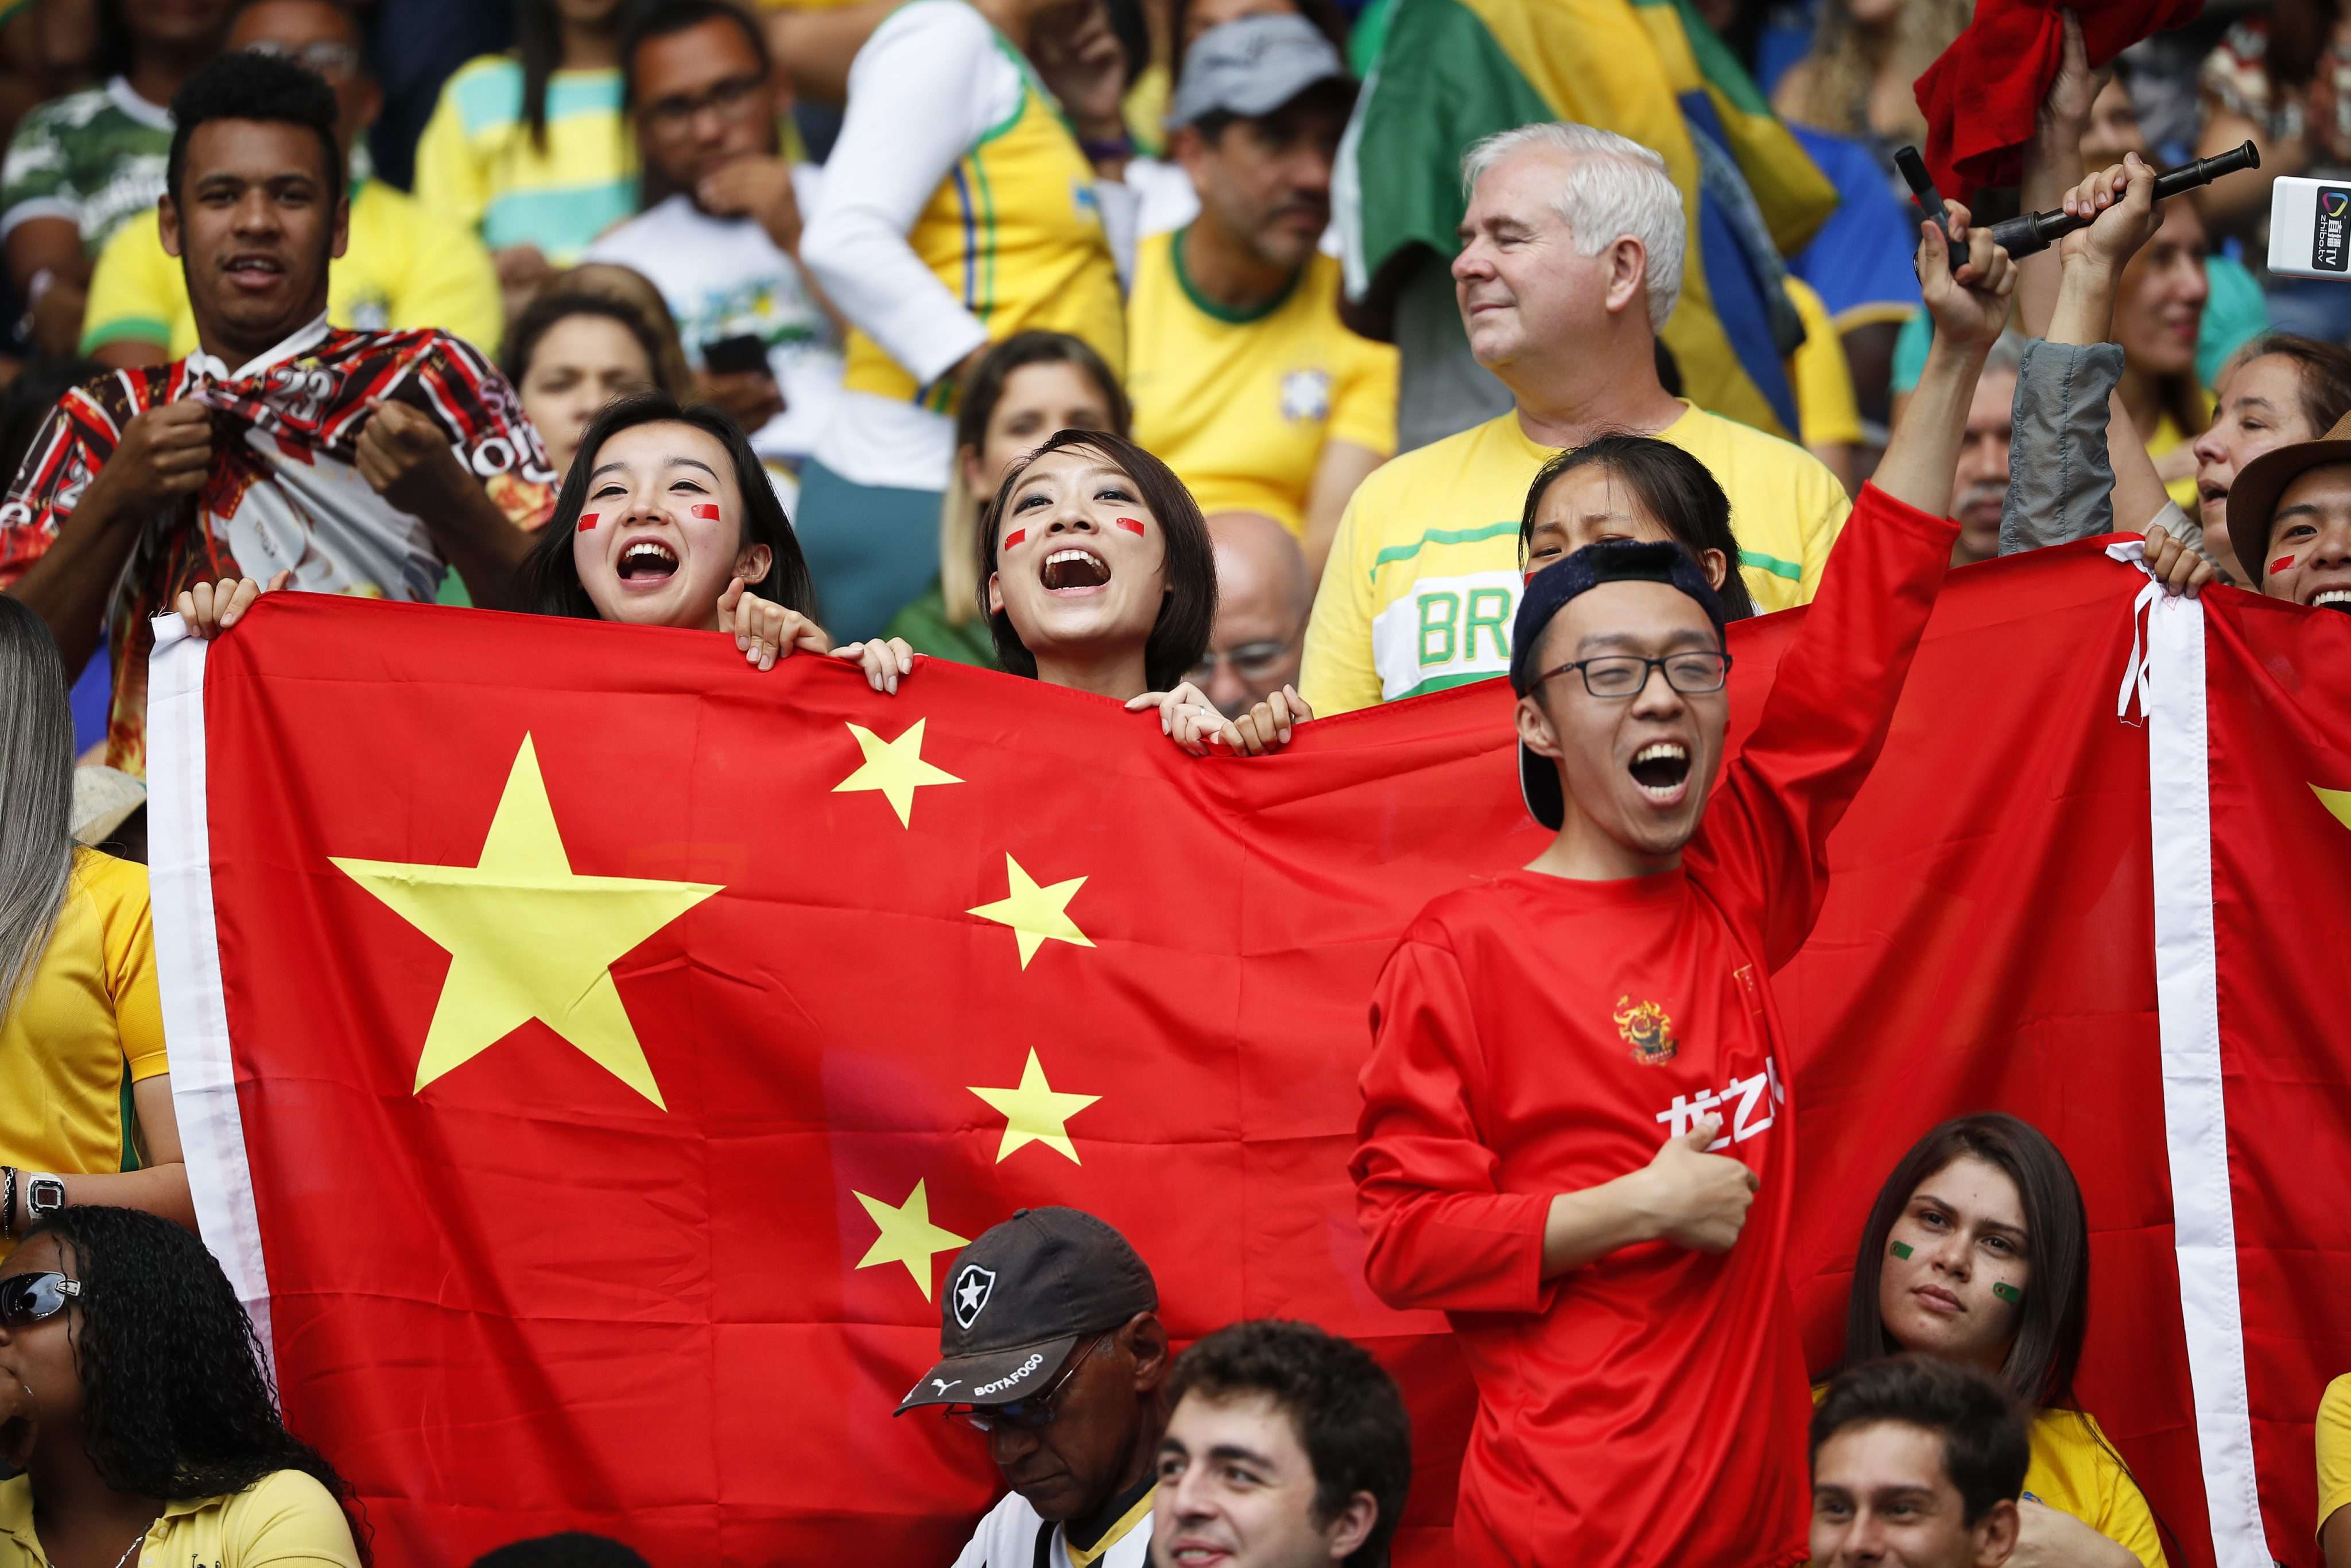 Chinese fans cheer on their team during the women’s first-round match between Brazil and China at the Rio Olympics. Pushed by President Xi Jinping, the Chinese government plans to turn the country into a soccer powerhouse by 2050. Photo: EPA